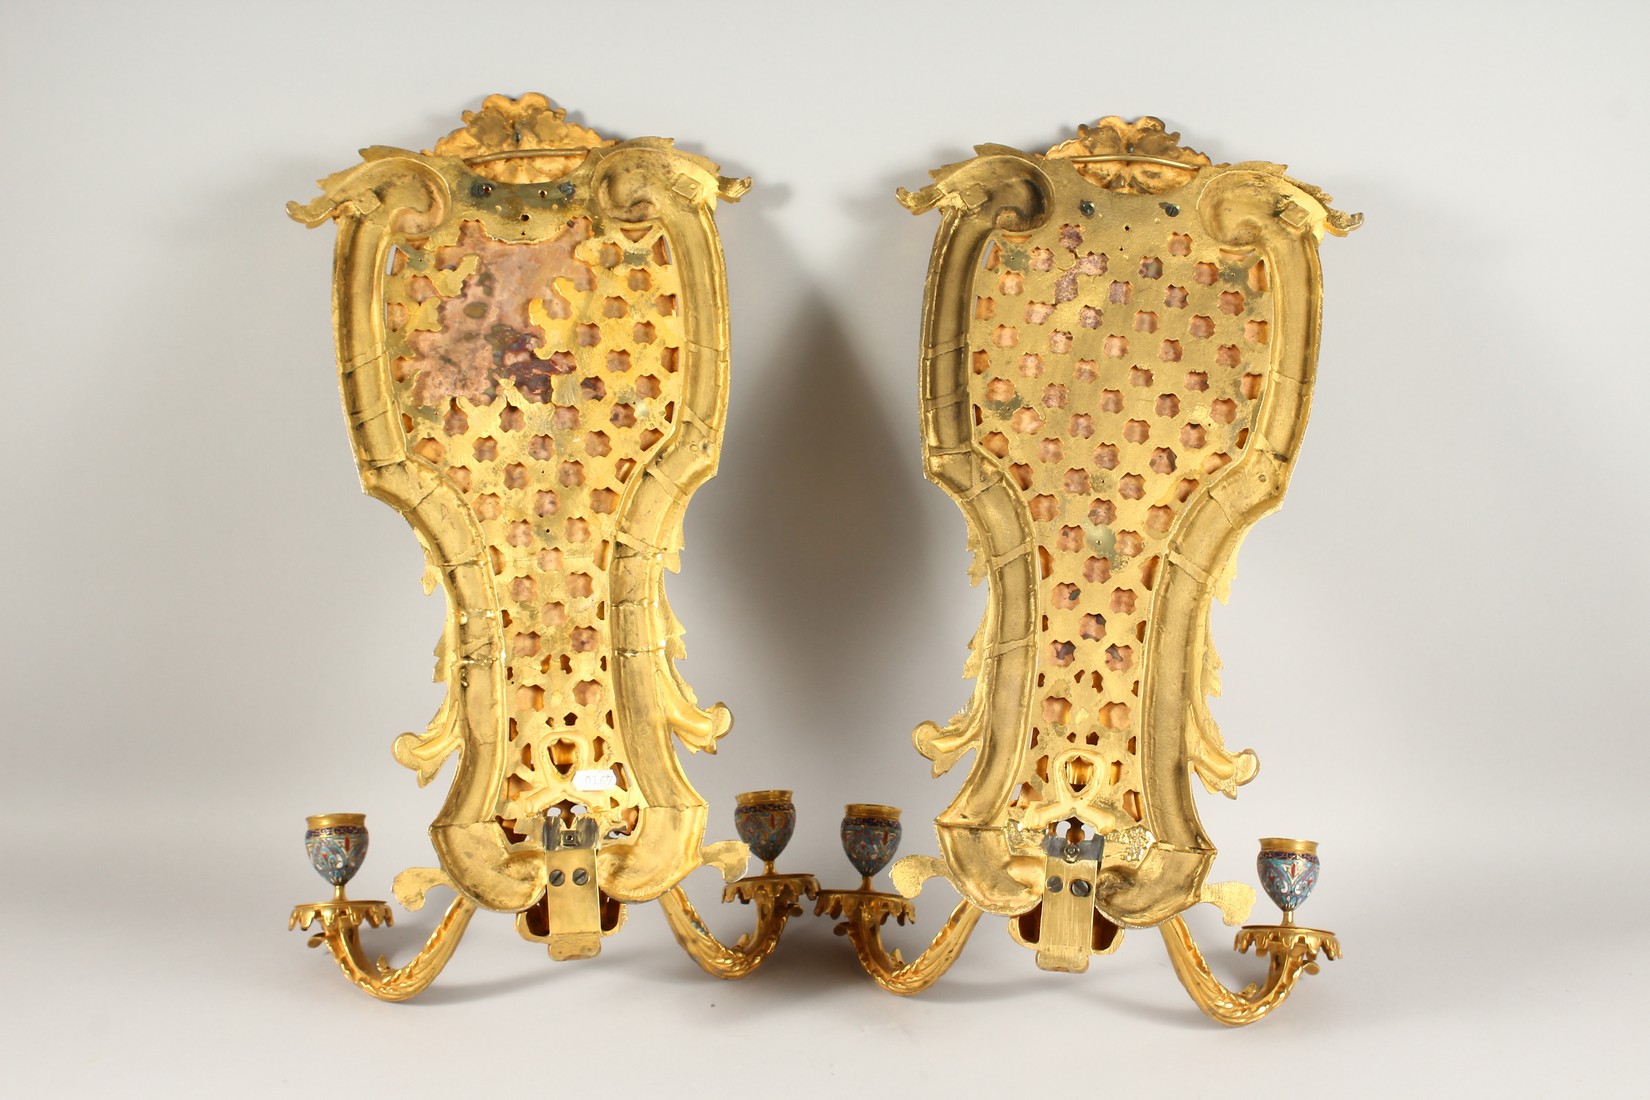 A SUPERB PAIR OF FRENCH ORMOLU AND ENAMEL TWO LIGHT WALL SCONCES WITH ACANTHUS AND SCROLLS 22ins - Image 6 of 7